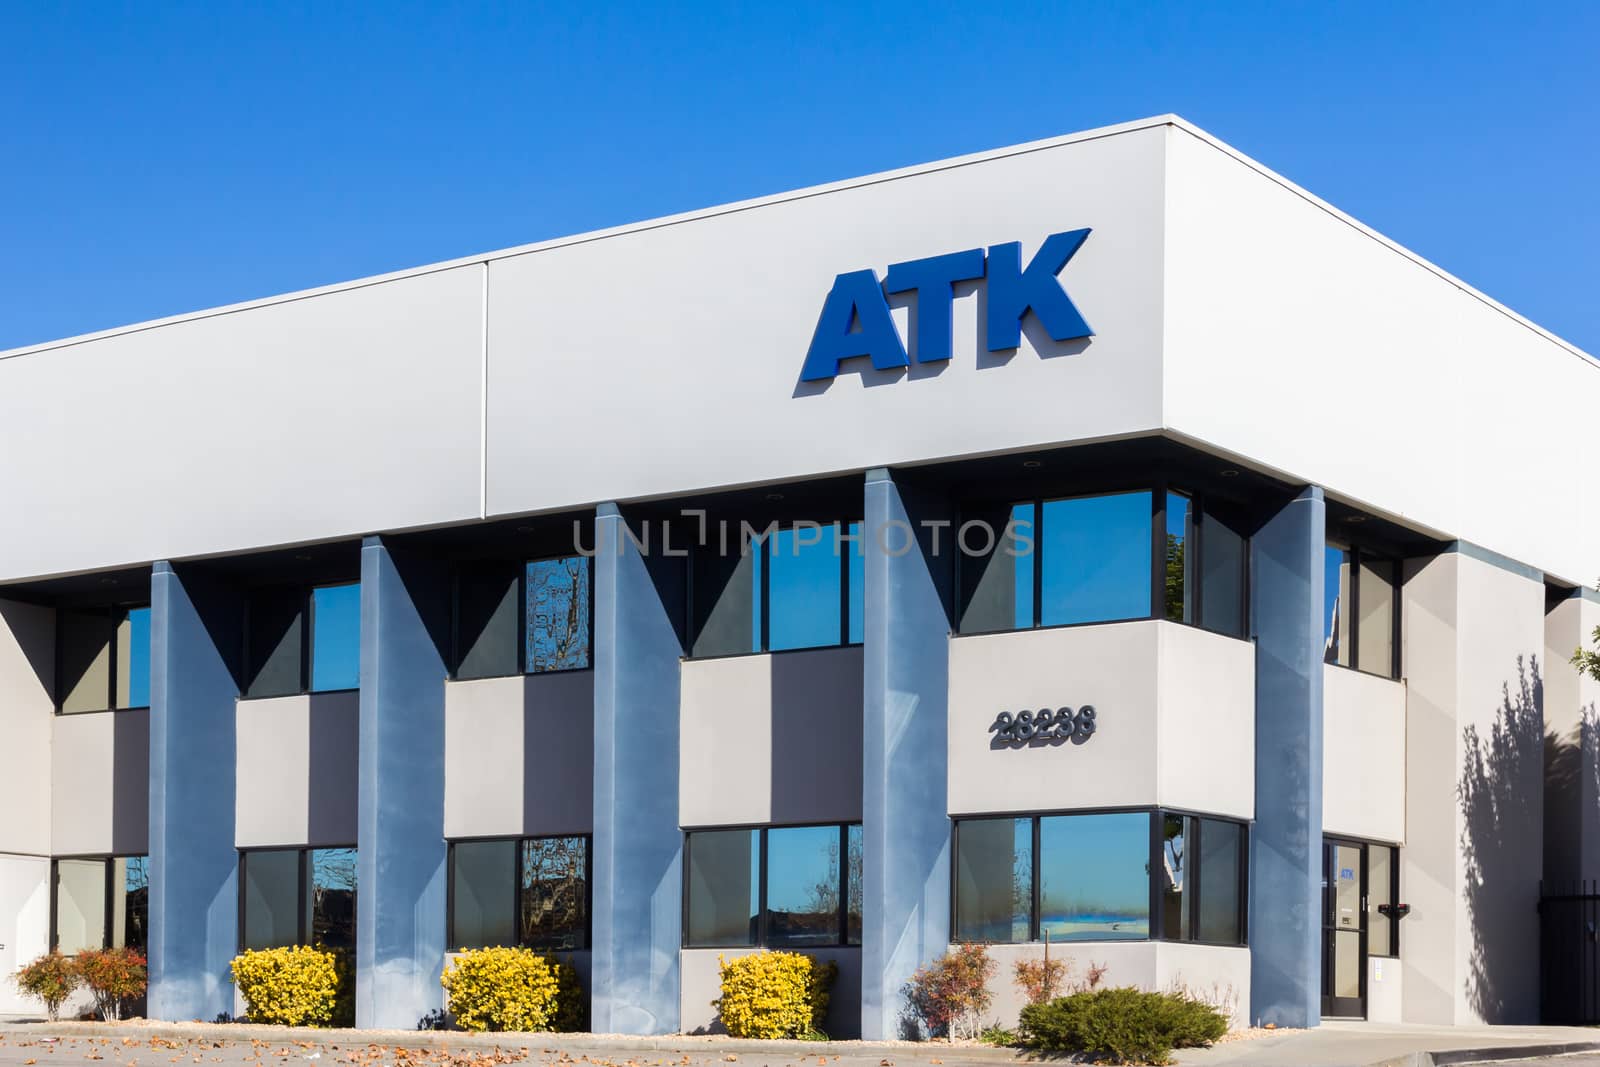 ATK Services Exterior and Logo by wolterk